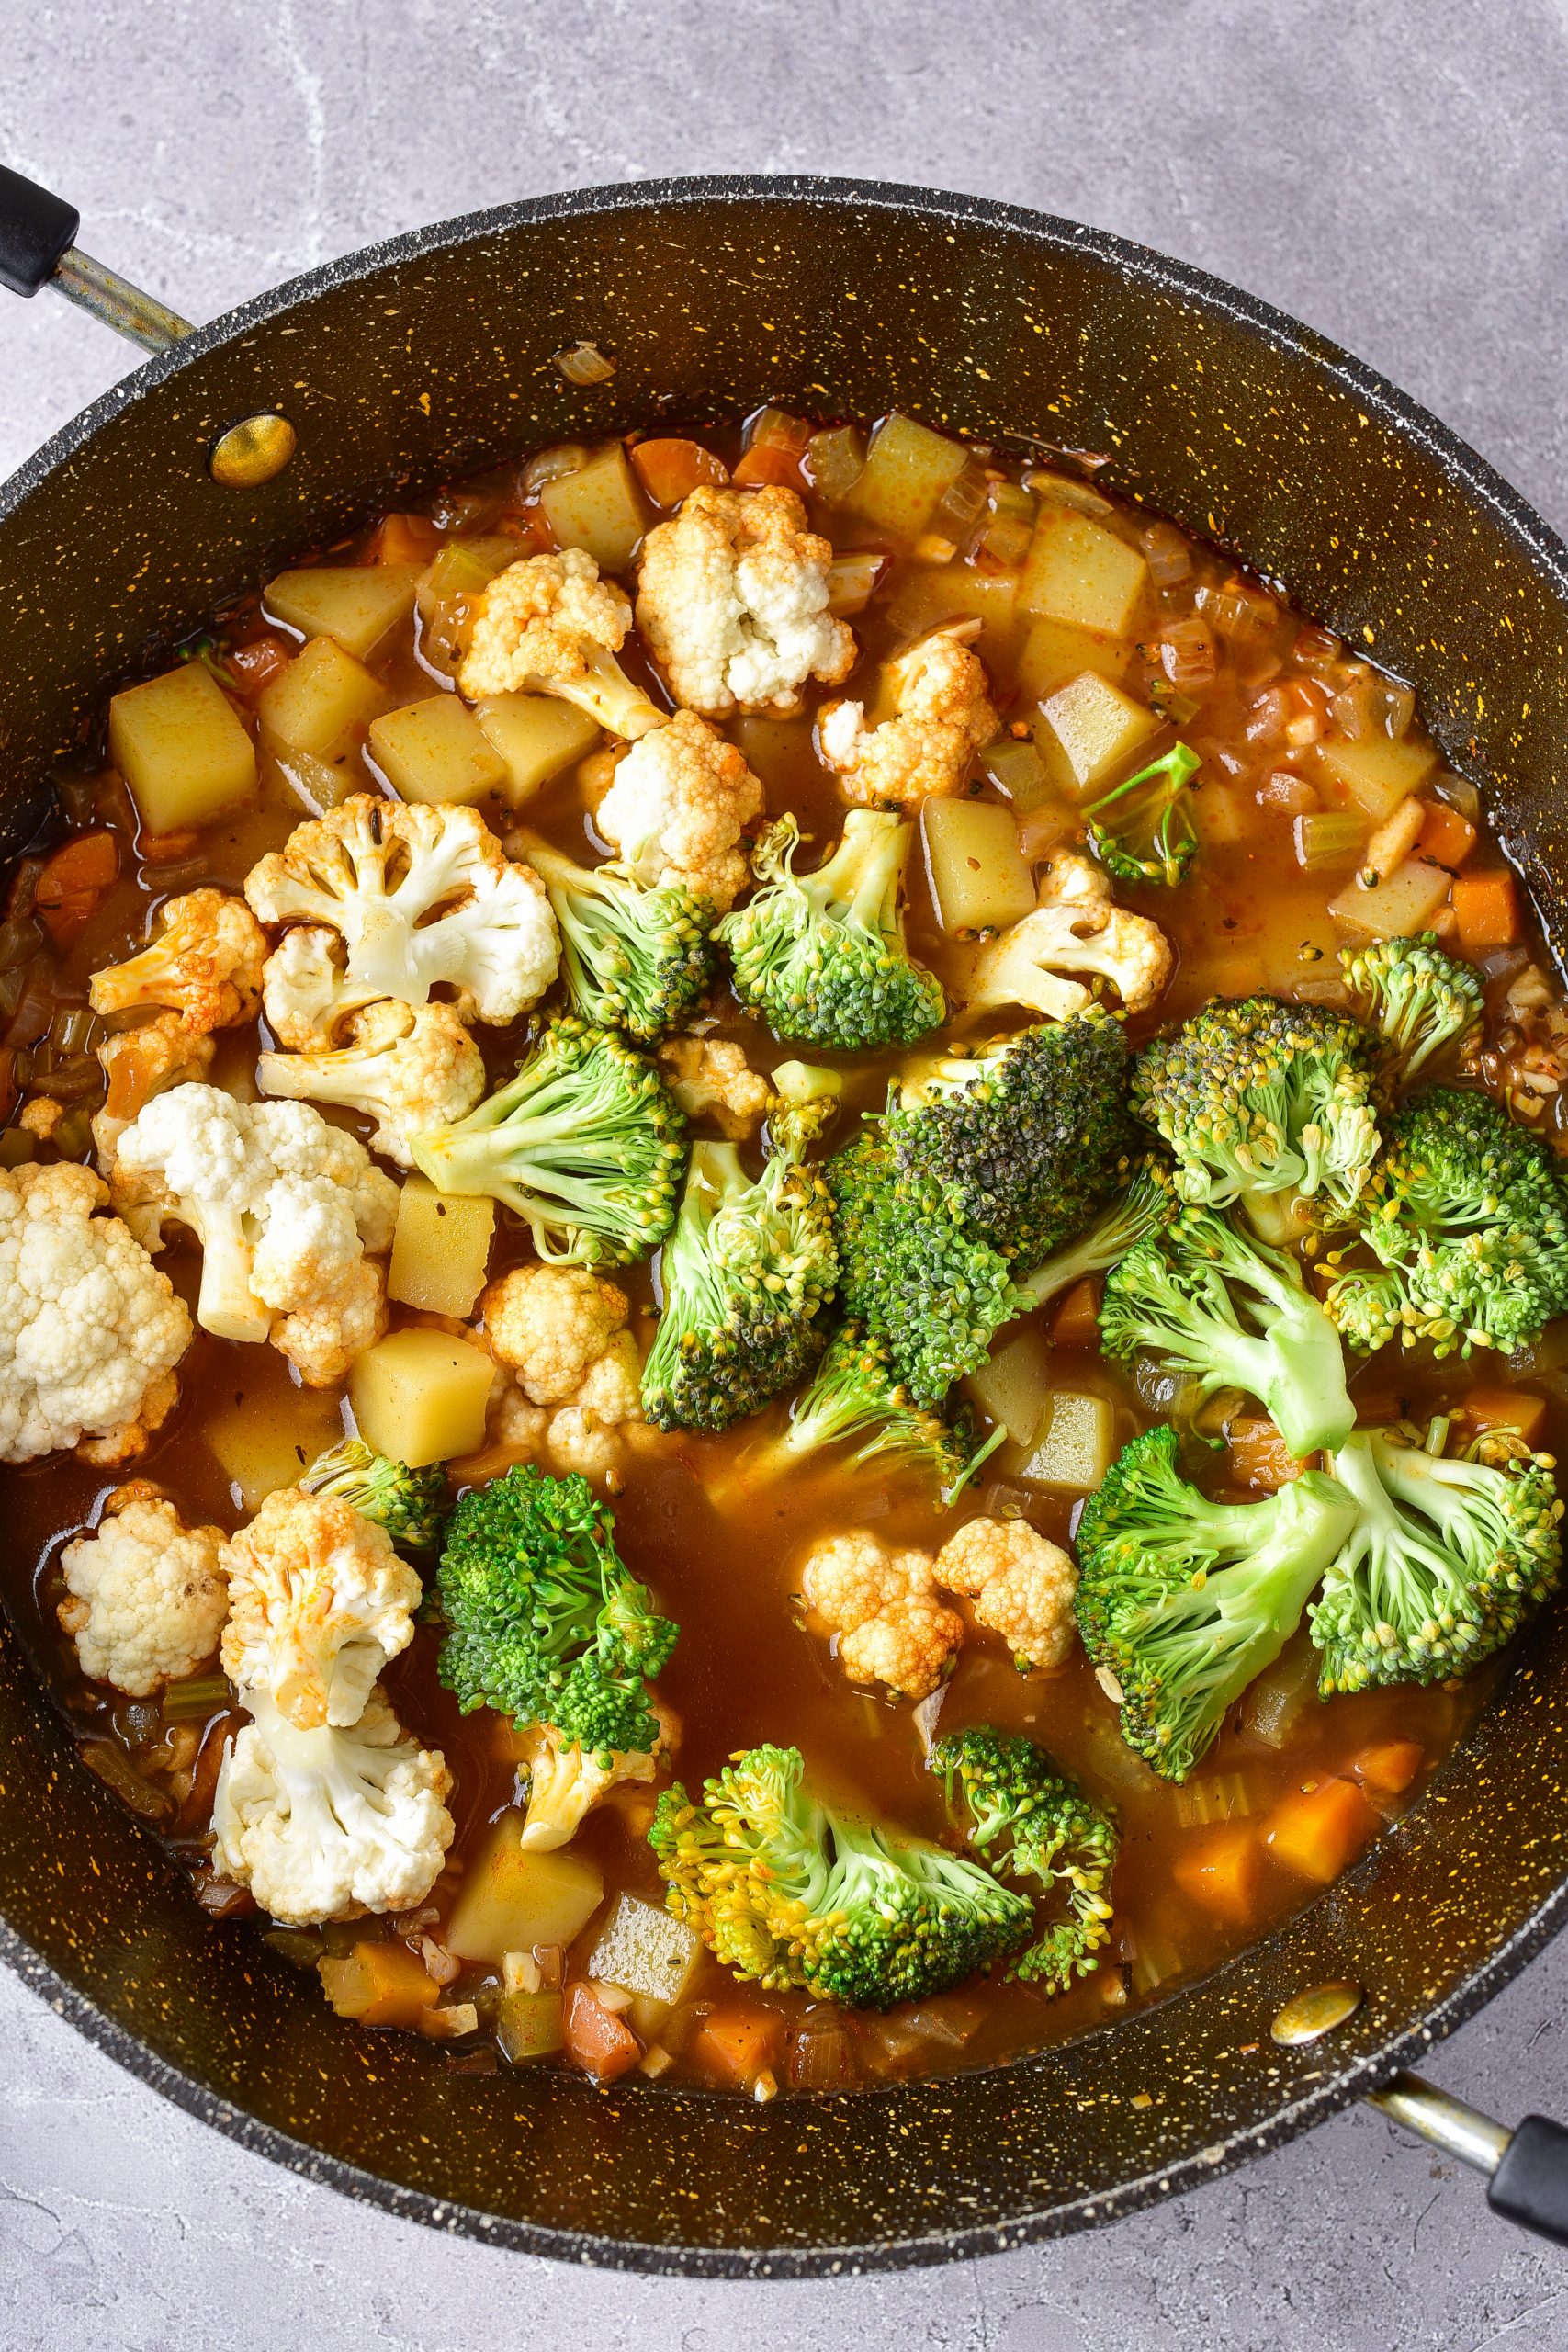 Mix the cauliflower and broccoli florets into the pot, and cook until a crisp-tender. 